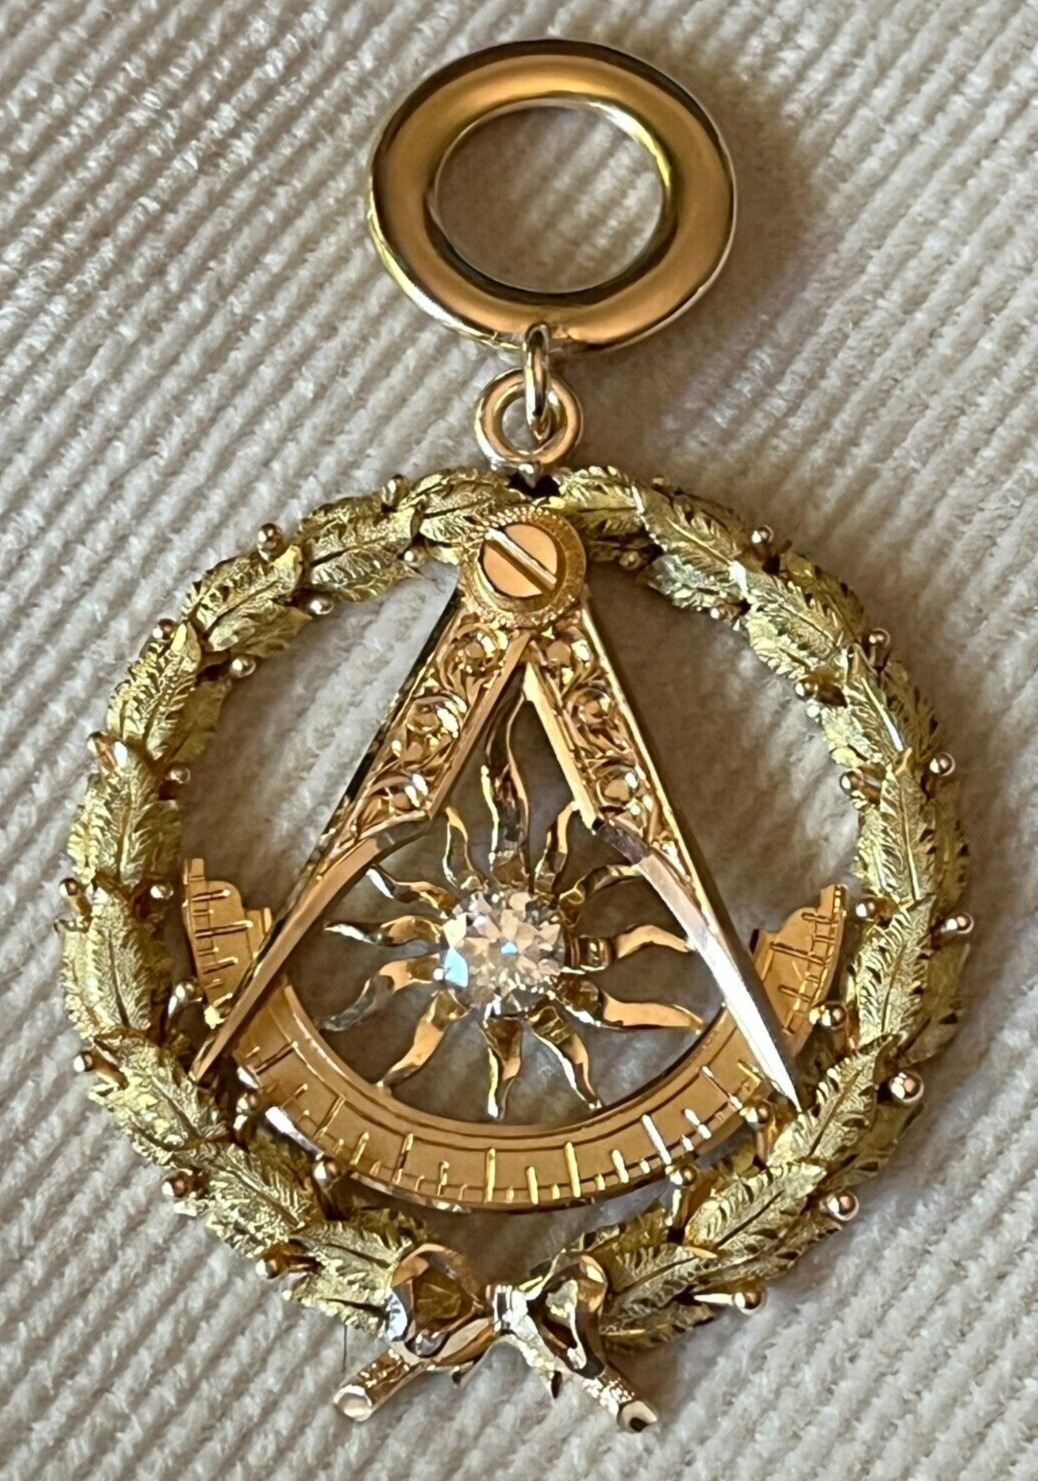 Antique 1908 14k Yellow/Green Gold Past Master Pin with Moissanite center stone